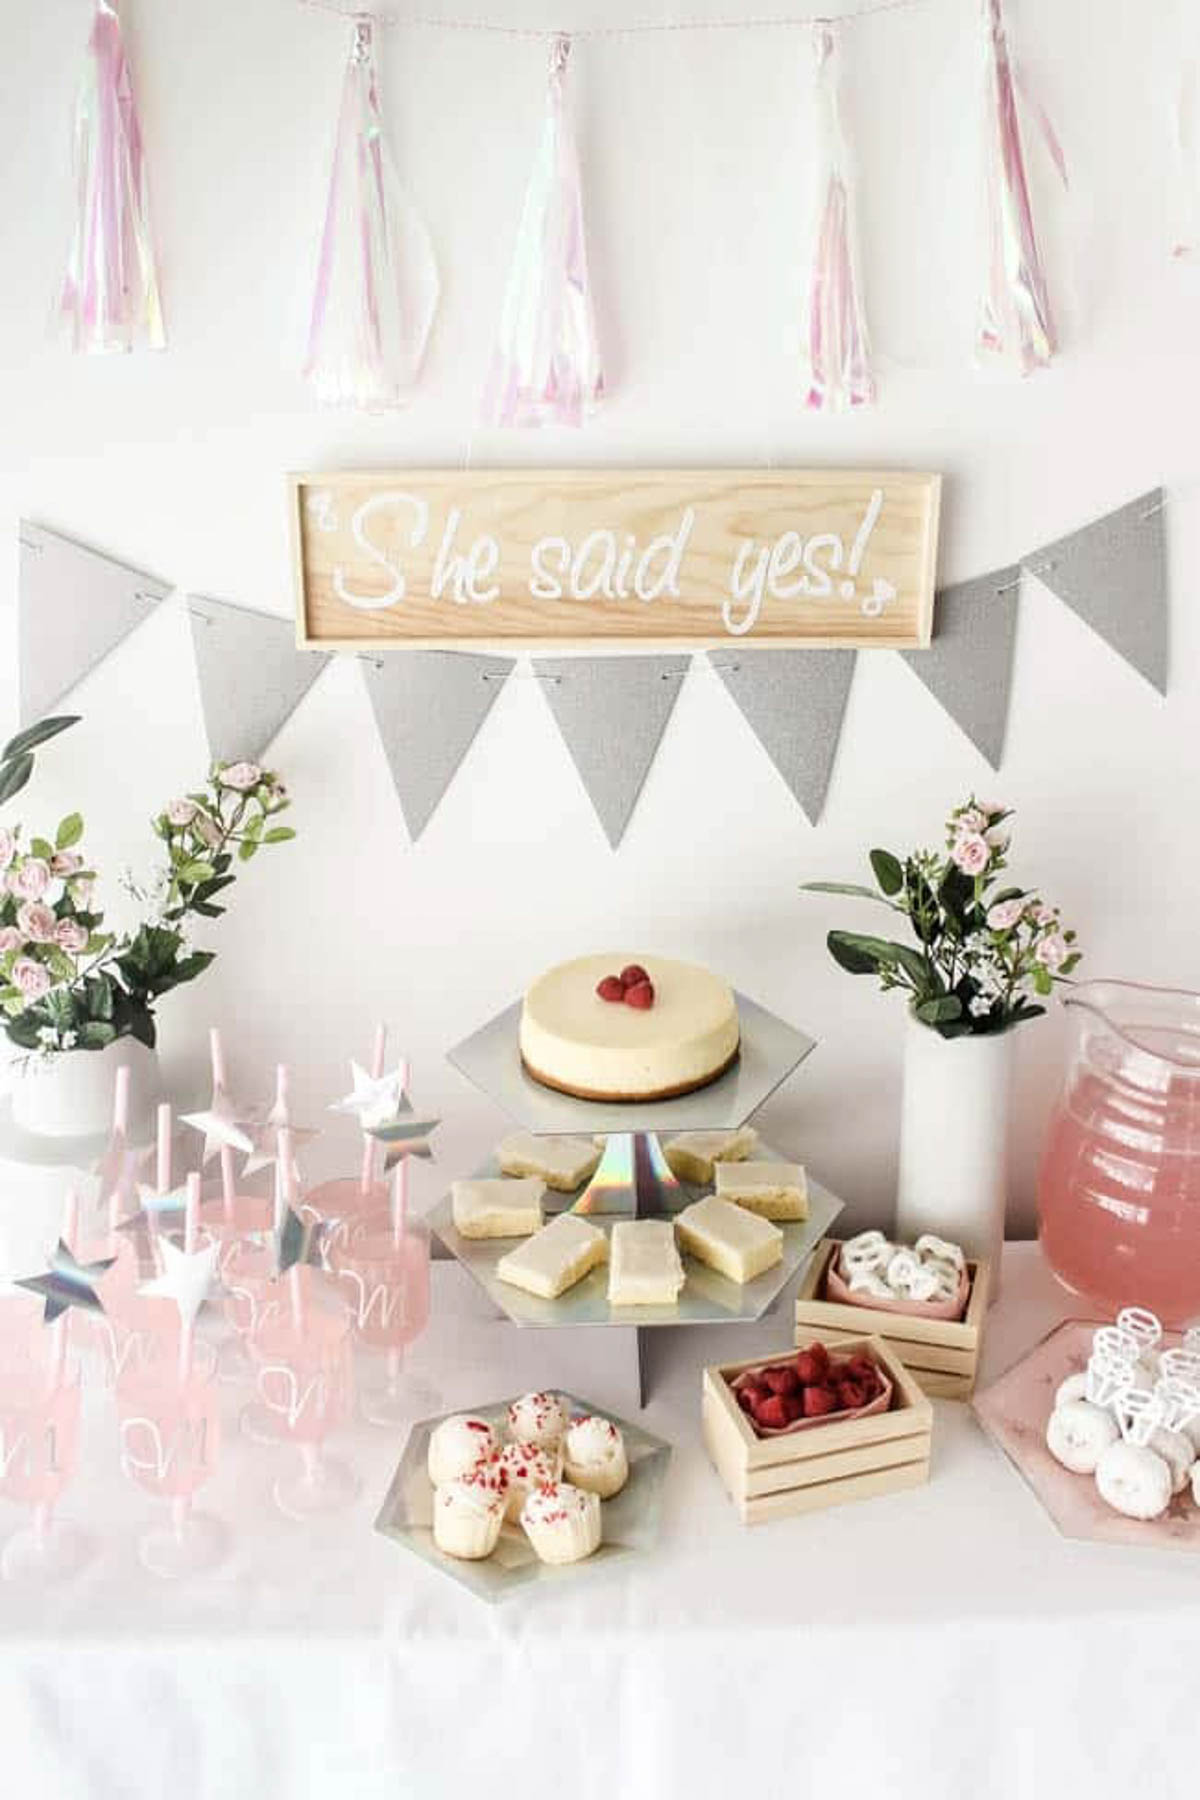 Dessert table decorated with bridal shower decor